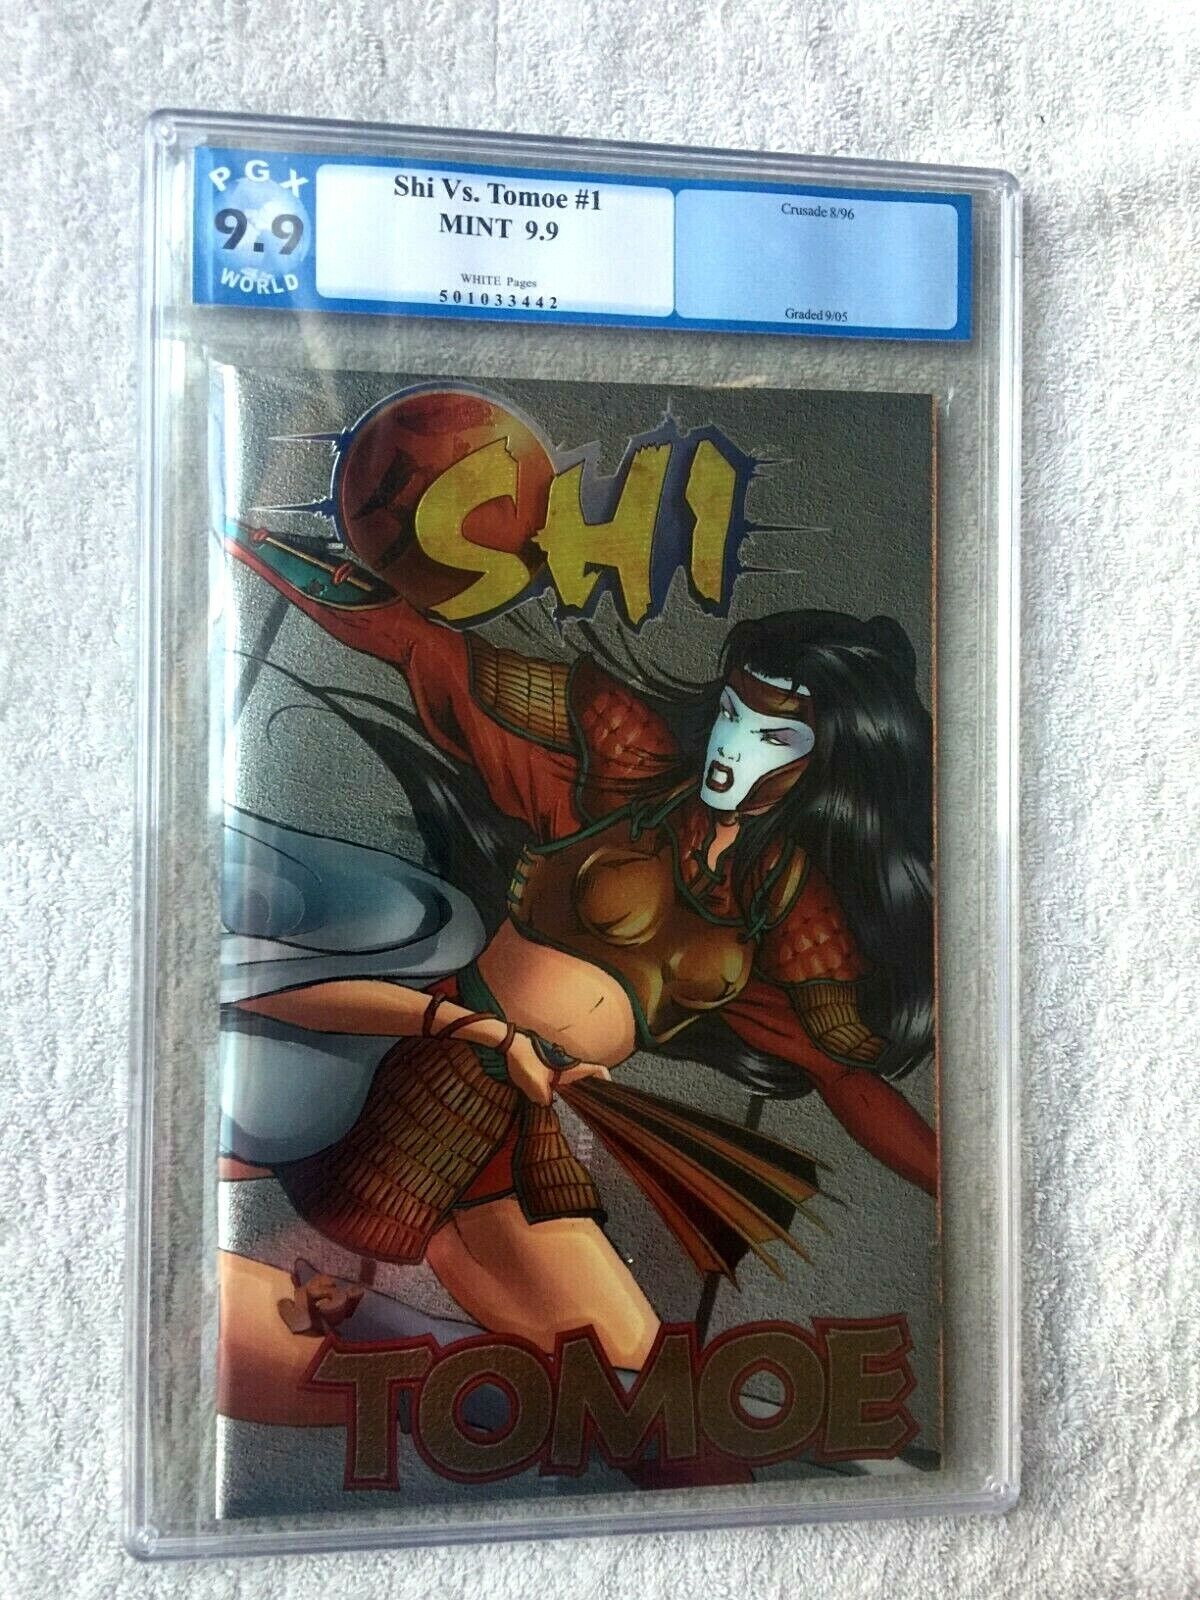 Shi vs Tomoe Crusade Special #1 PGX 9.9 MINT white pages AND a Free Reader Copy